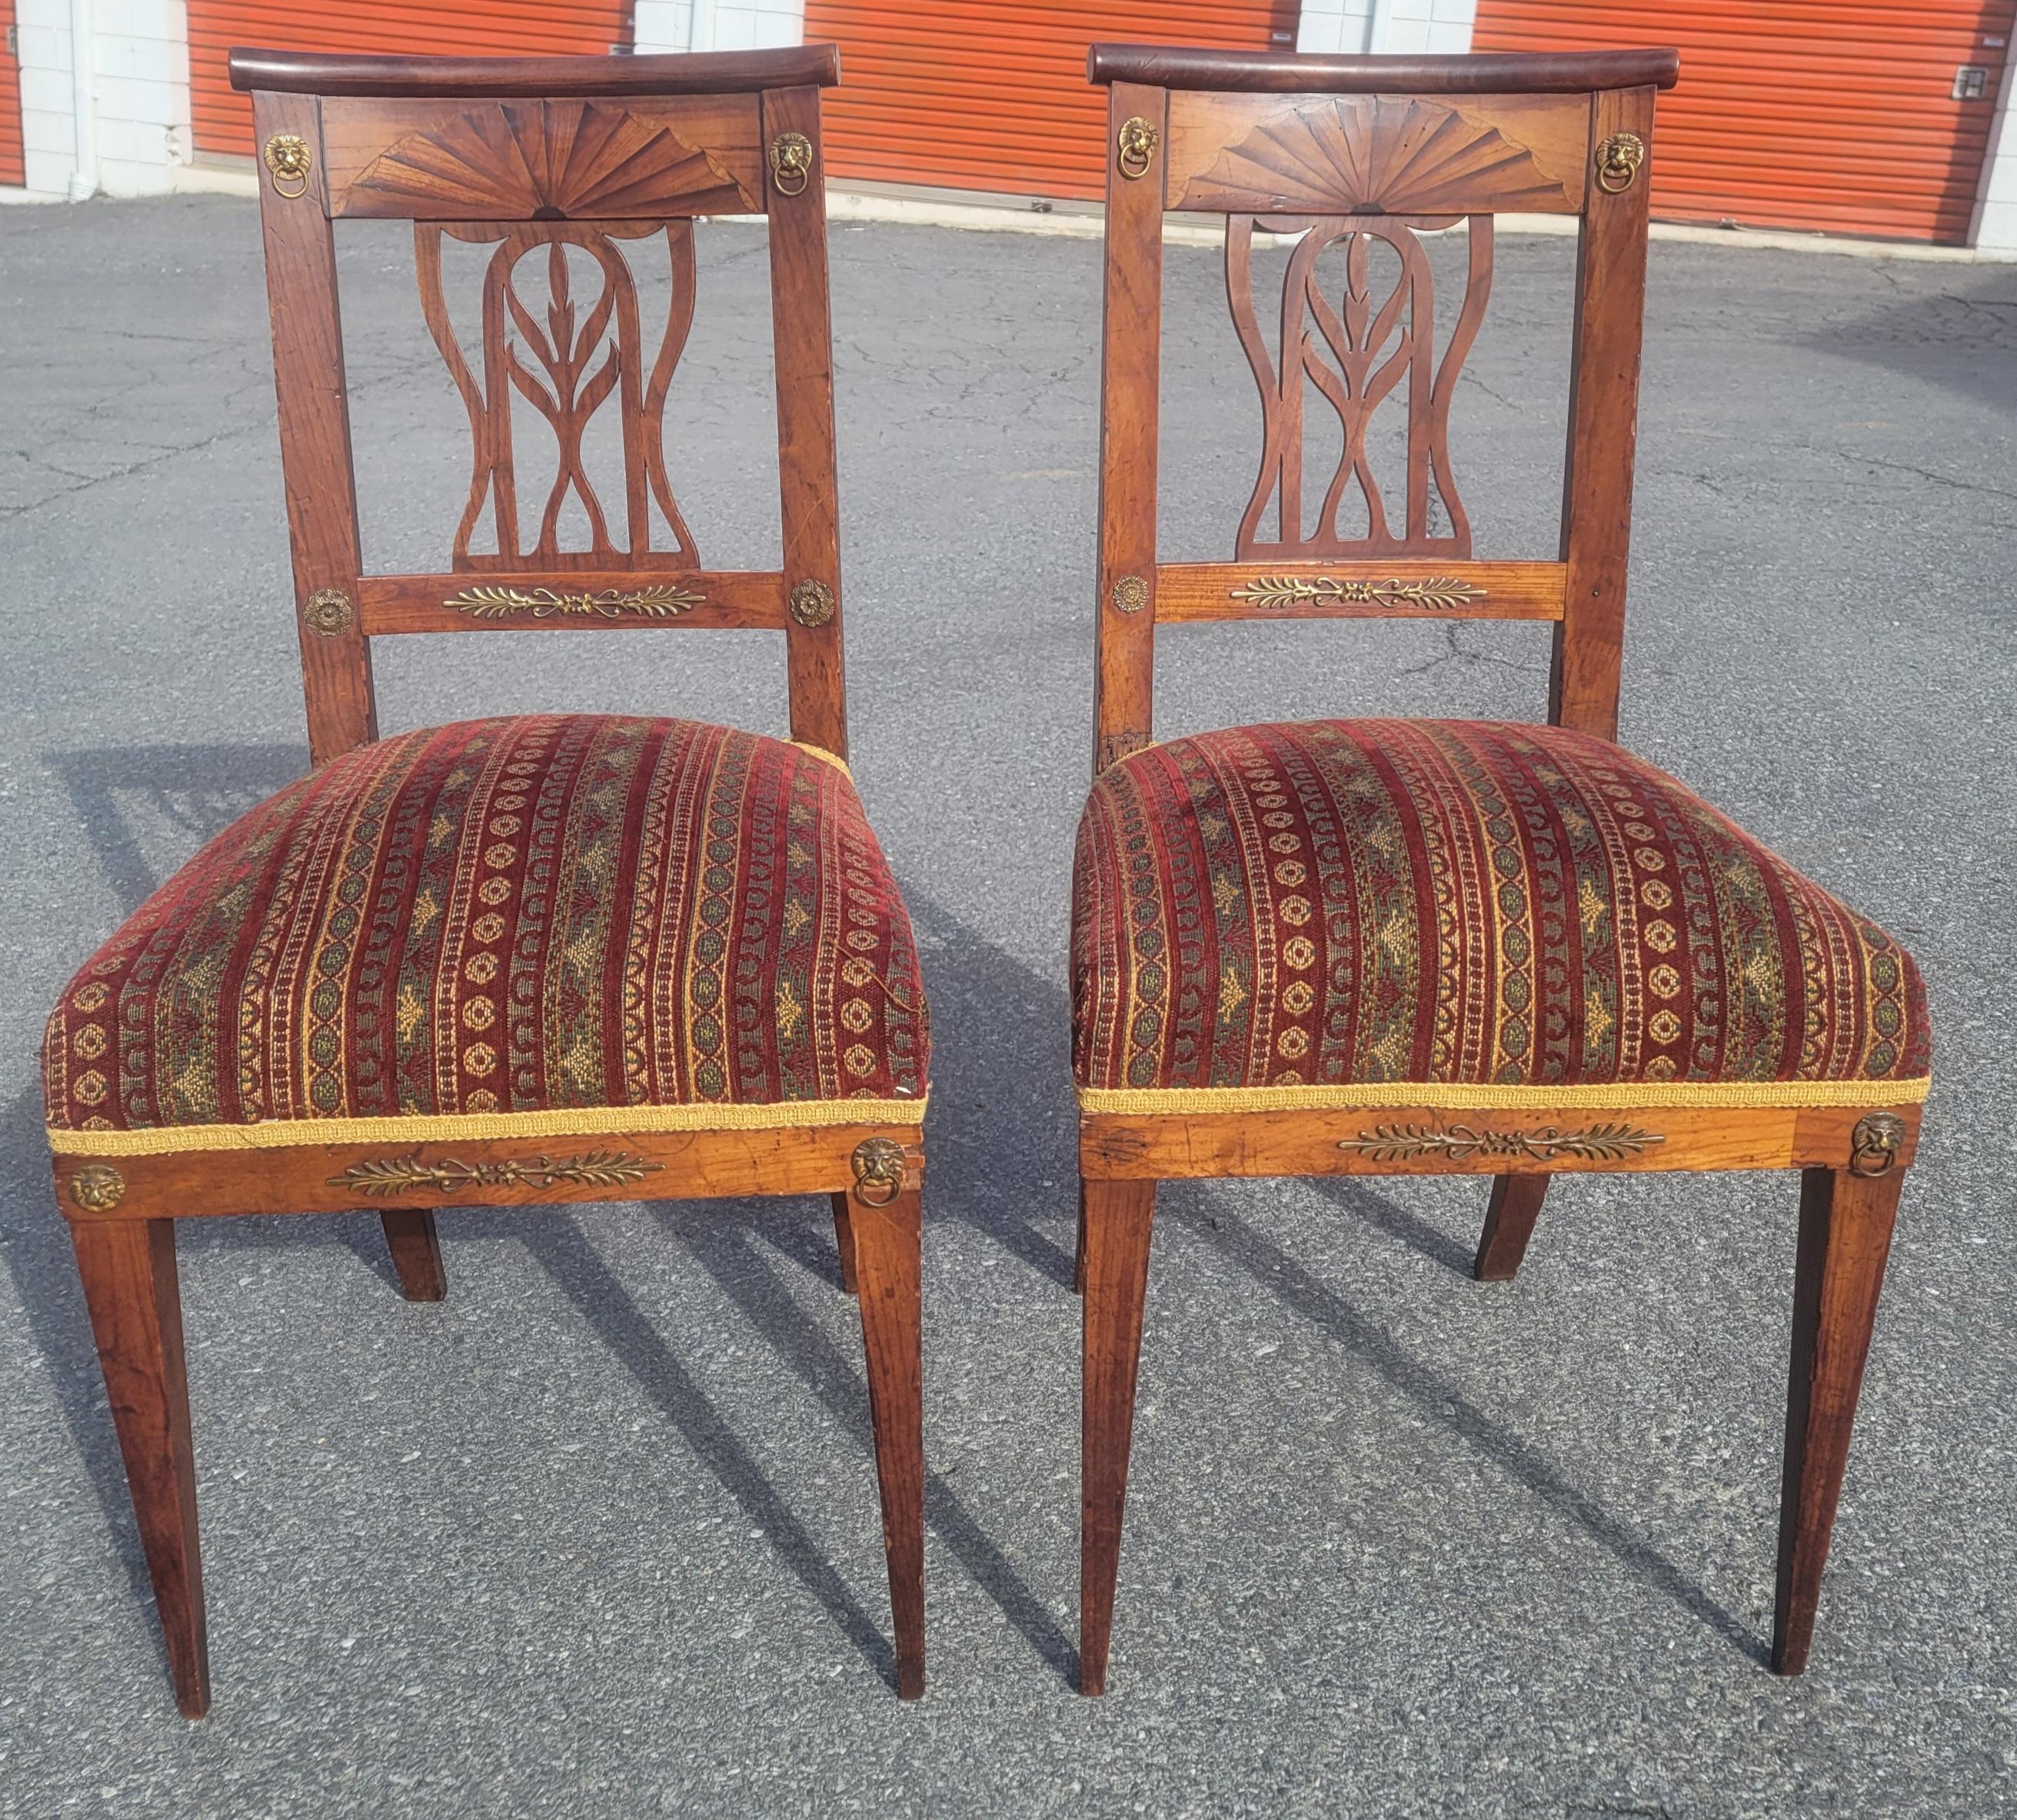 A magnificent pair of 19th century Swedish continental brass mounted and parquetry inlaid cherry chairs. Beaitiful inlay and parquetry work on backs. 
very comfortable, firm seats with springs. Upholstery in very good condition.
Measure 17